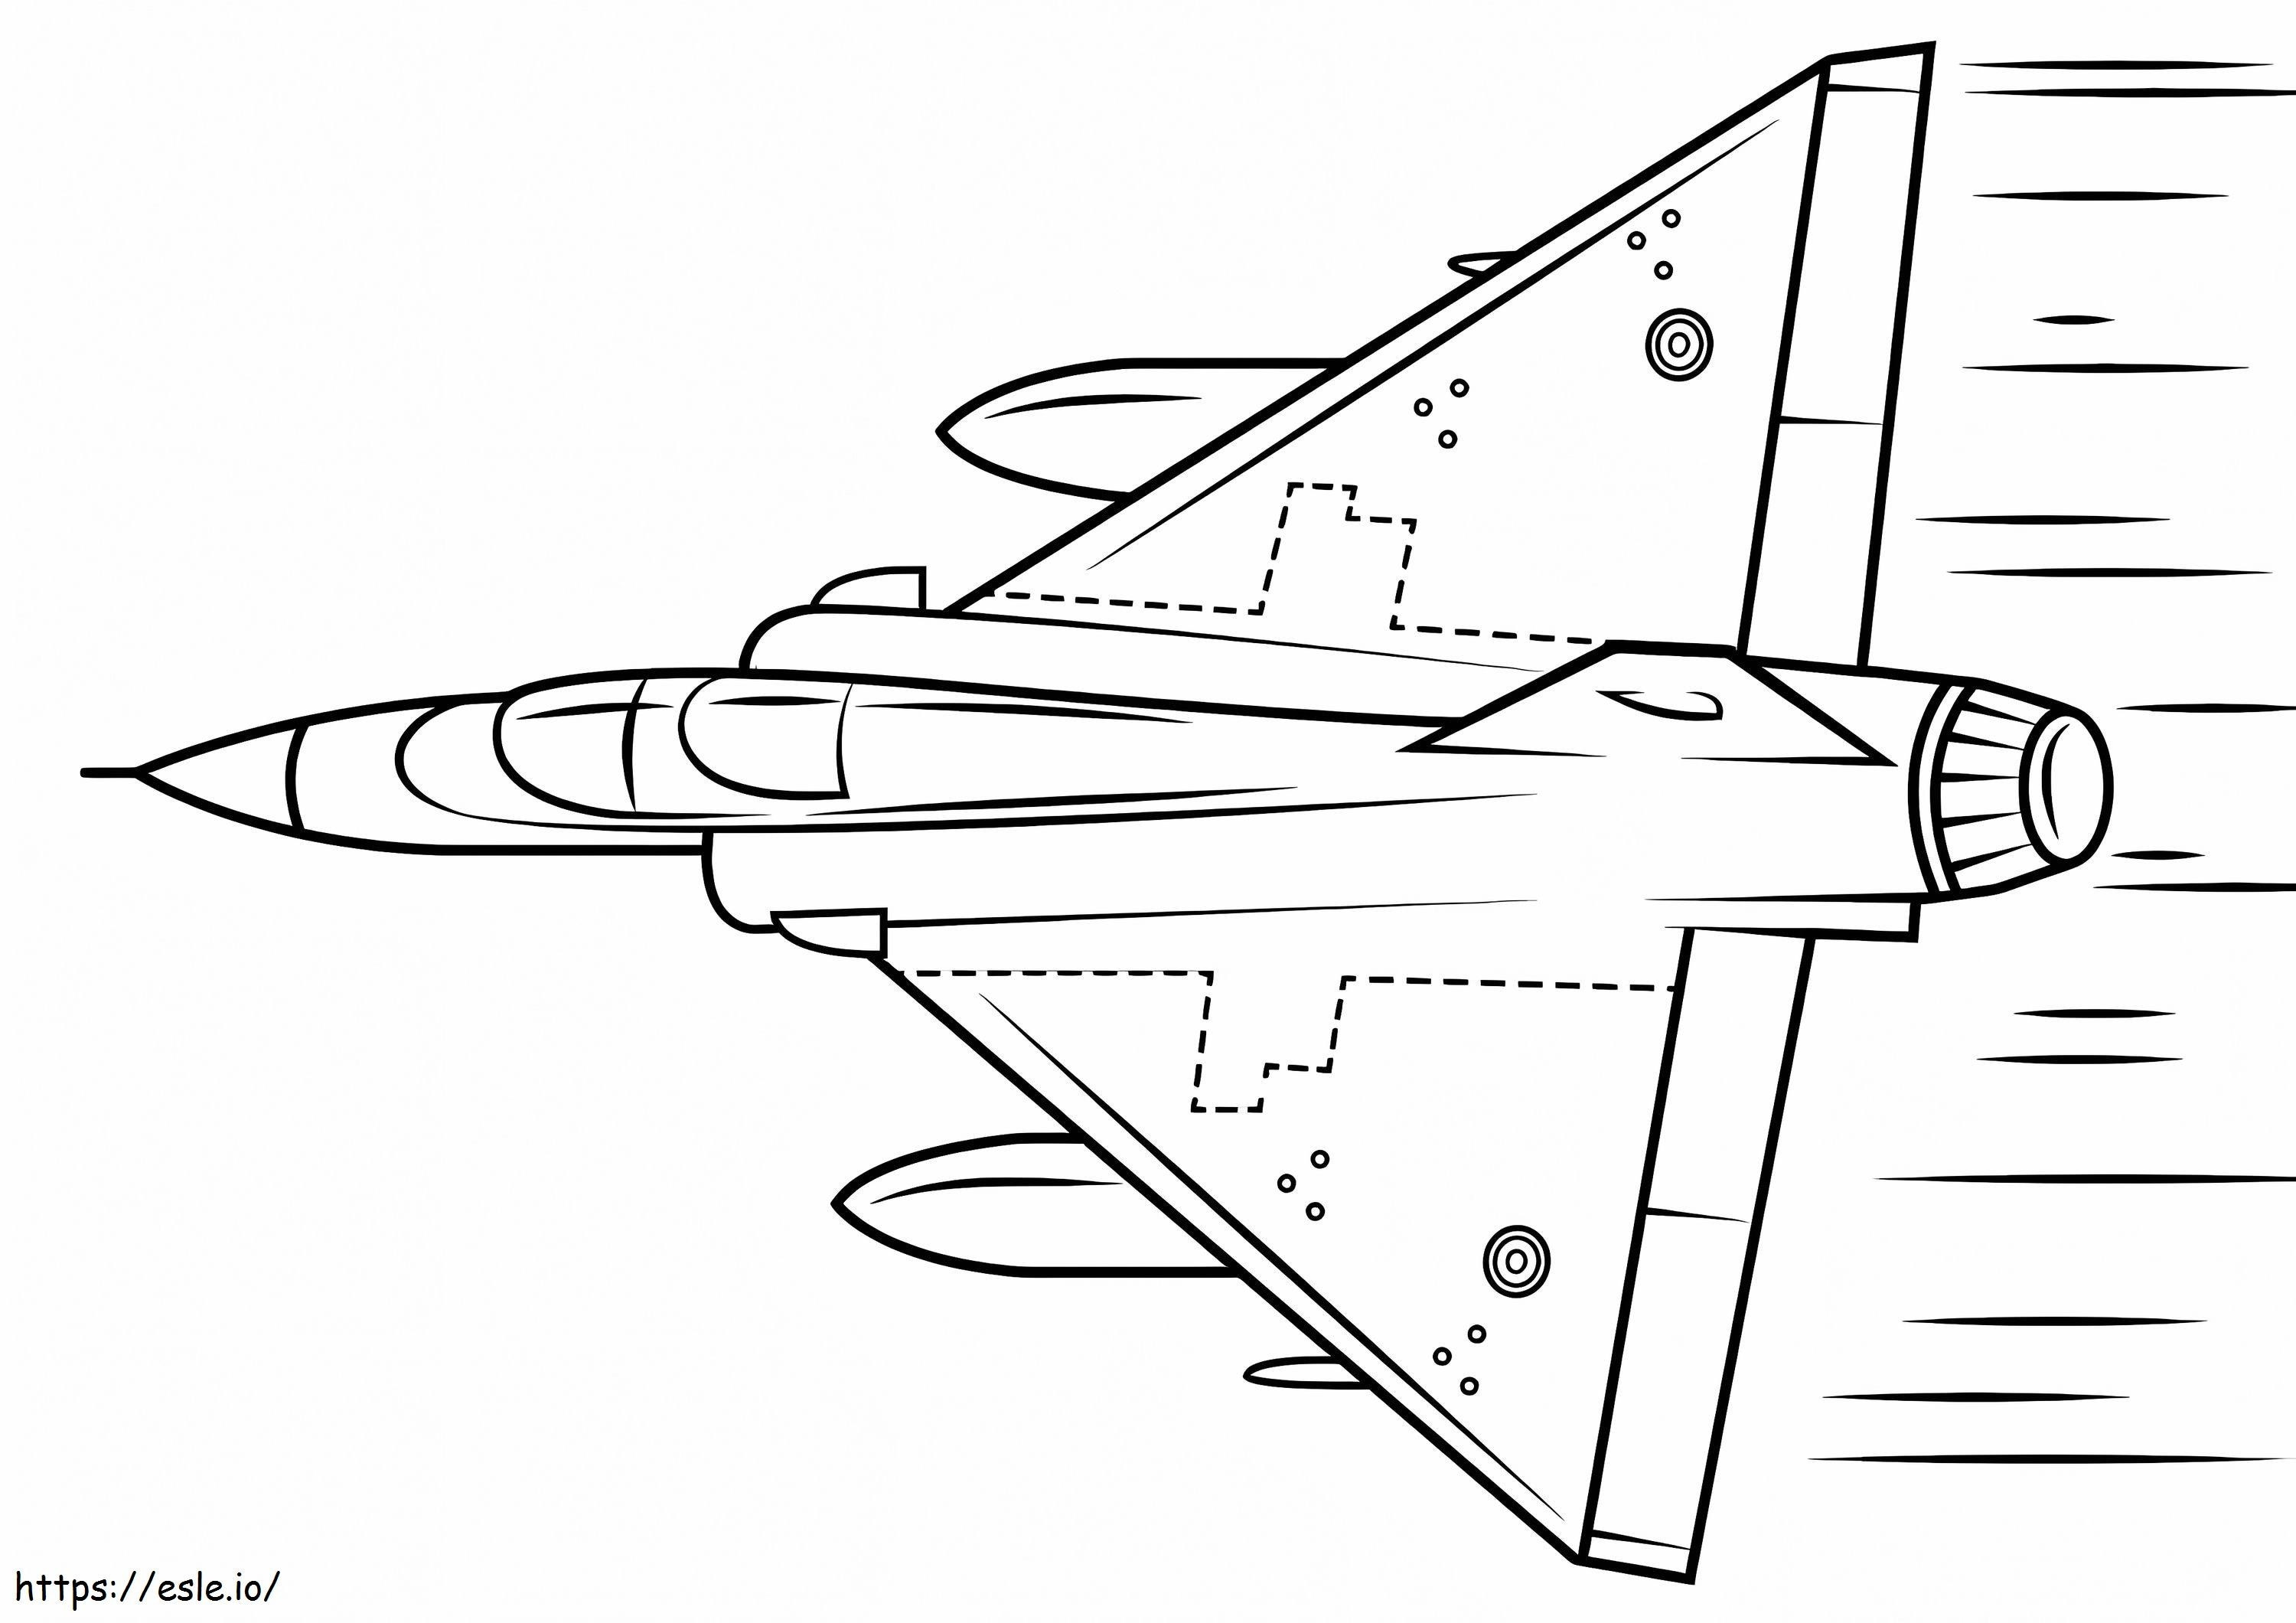 Mirage 2000 Fighter Jet coloring page